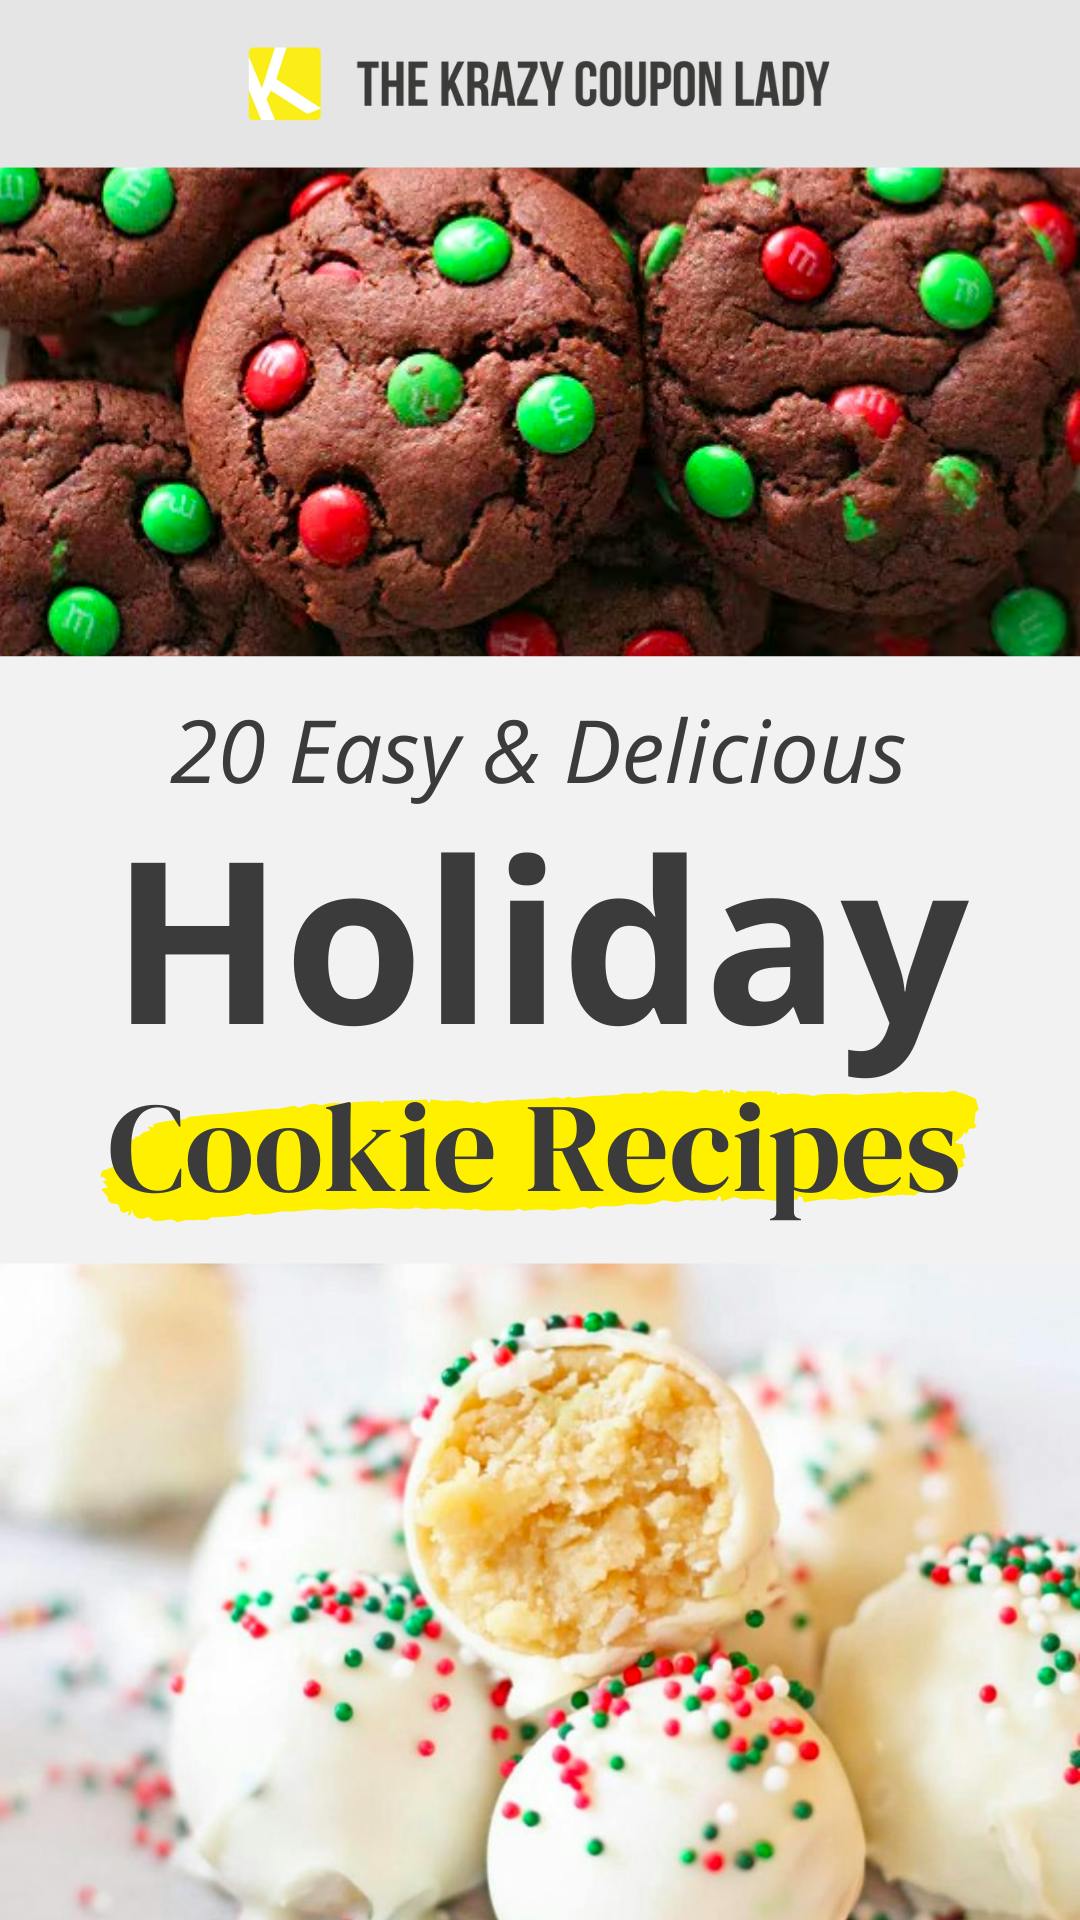 20 Drool-Worthy Holiday Cookie Recipes Anyone Can Make